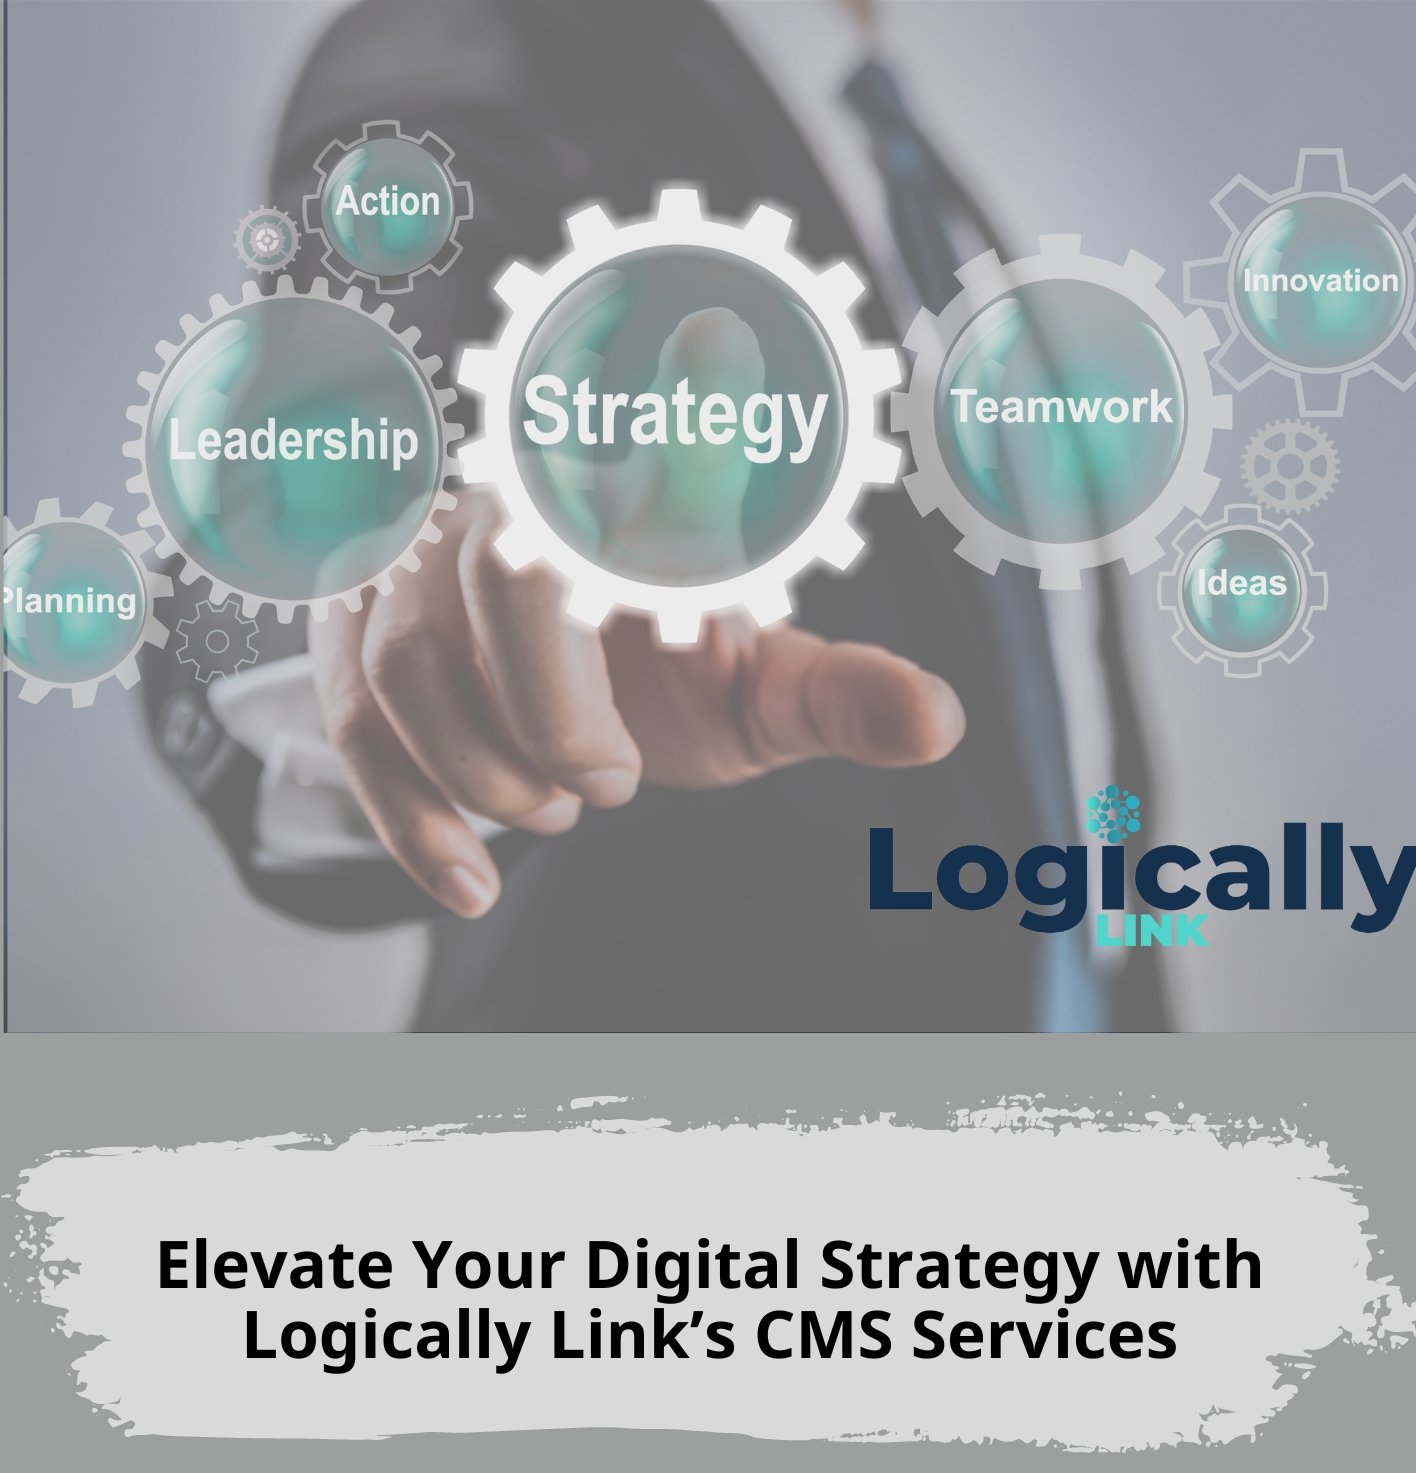 Elevate Your Digital Strategy with Logically Link’s CMS Services